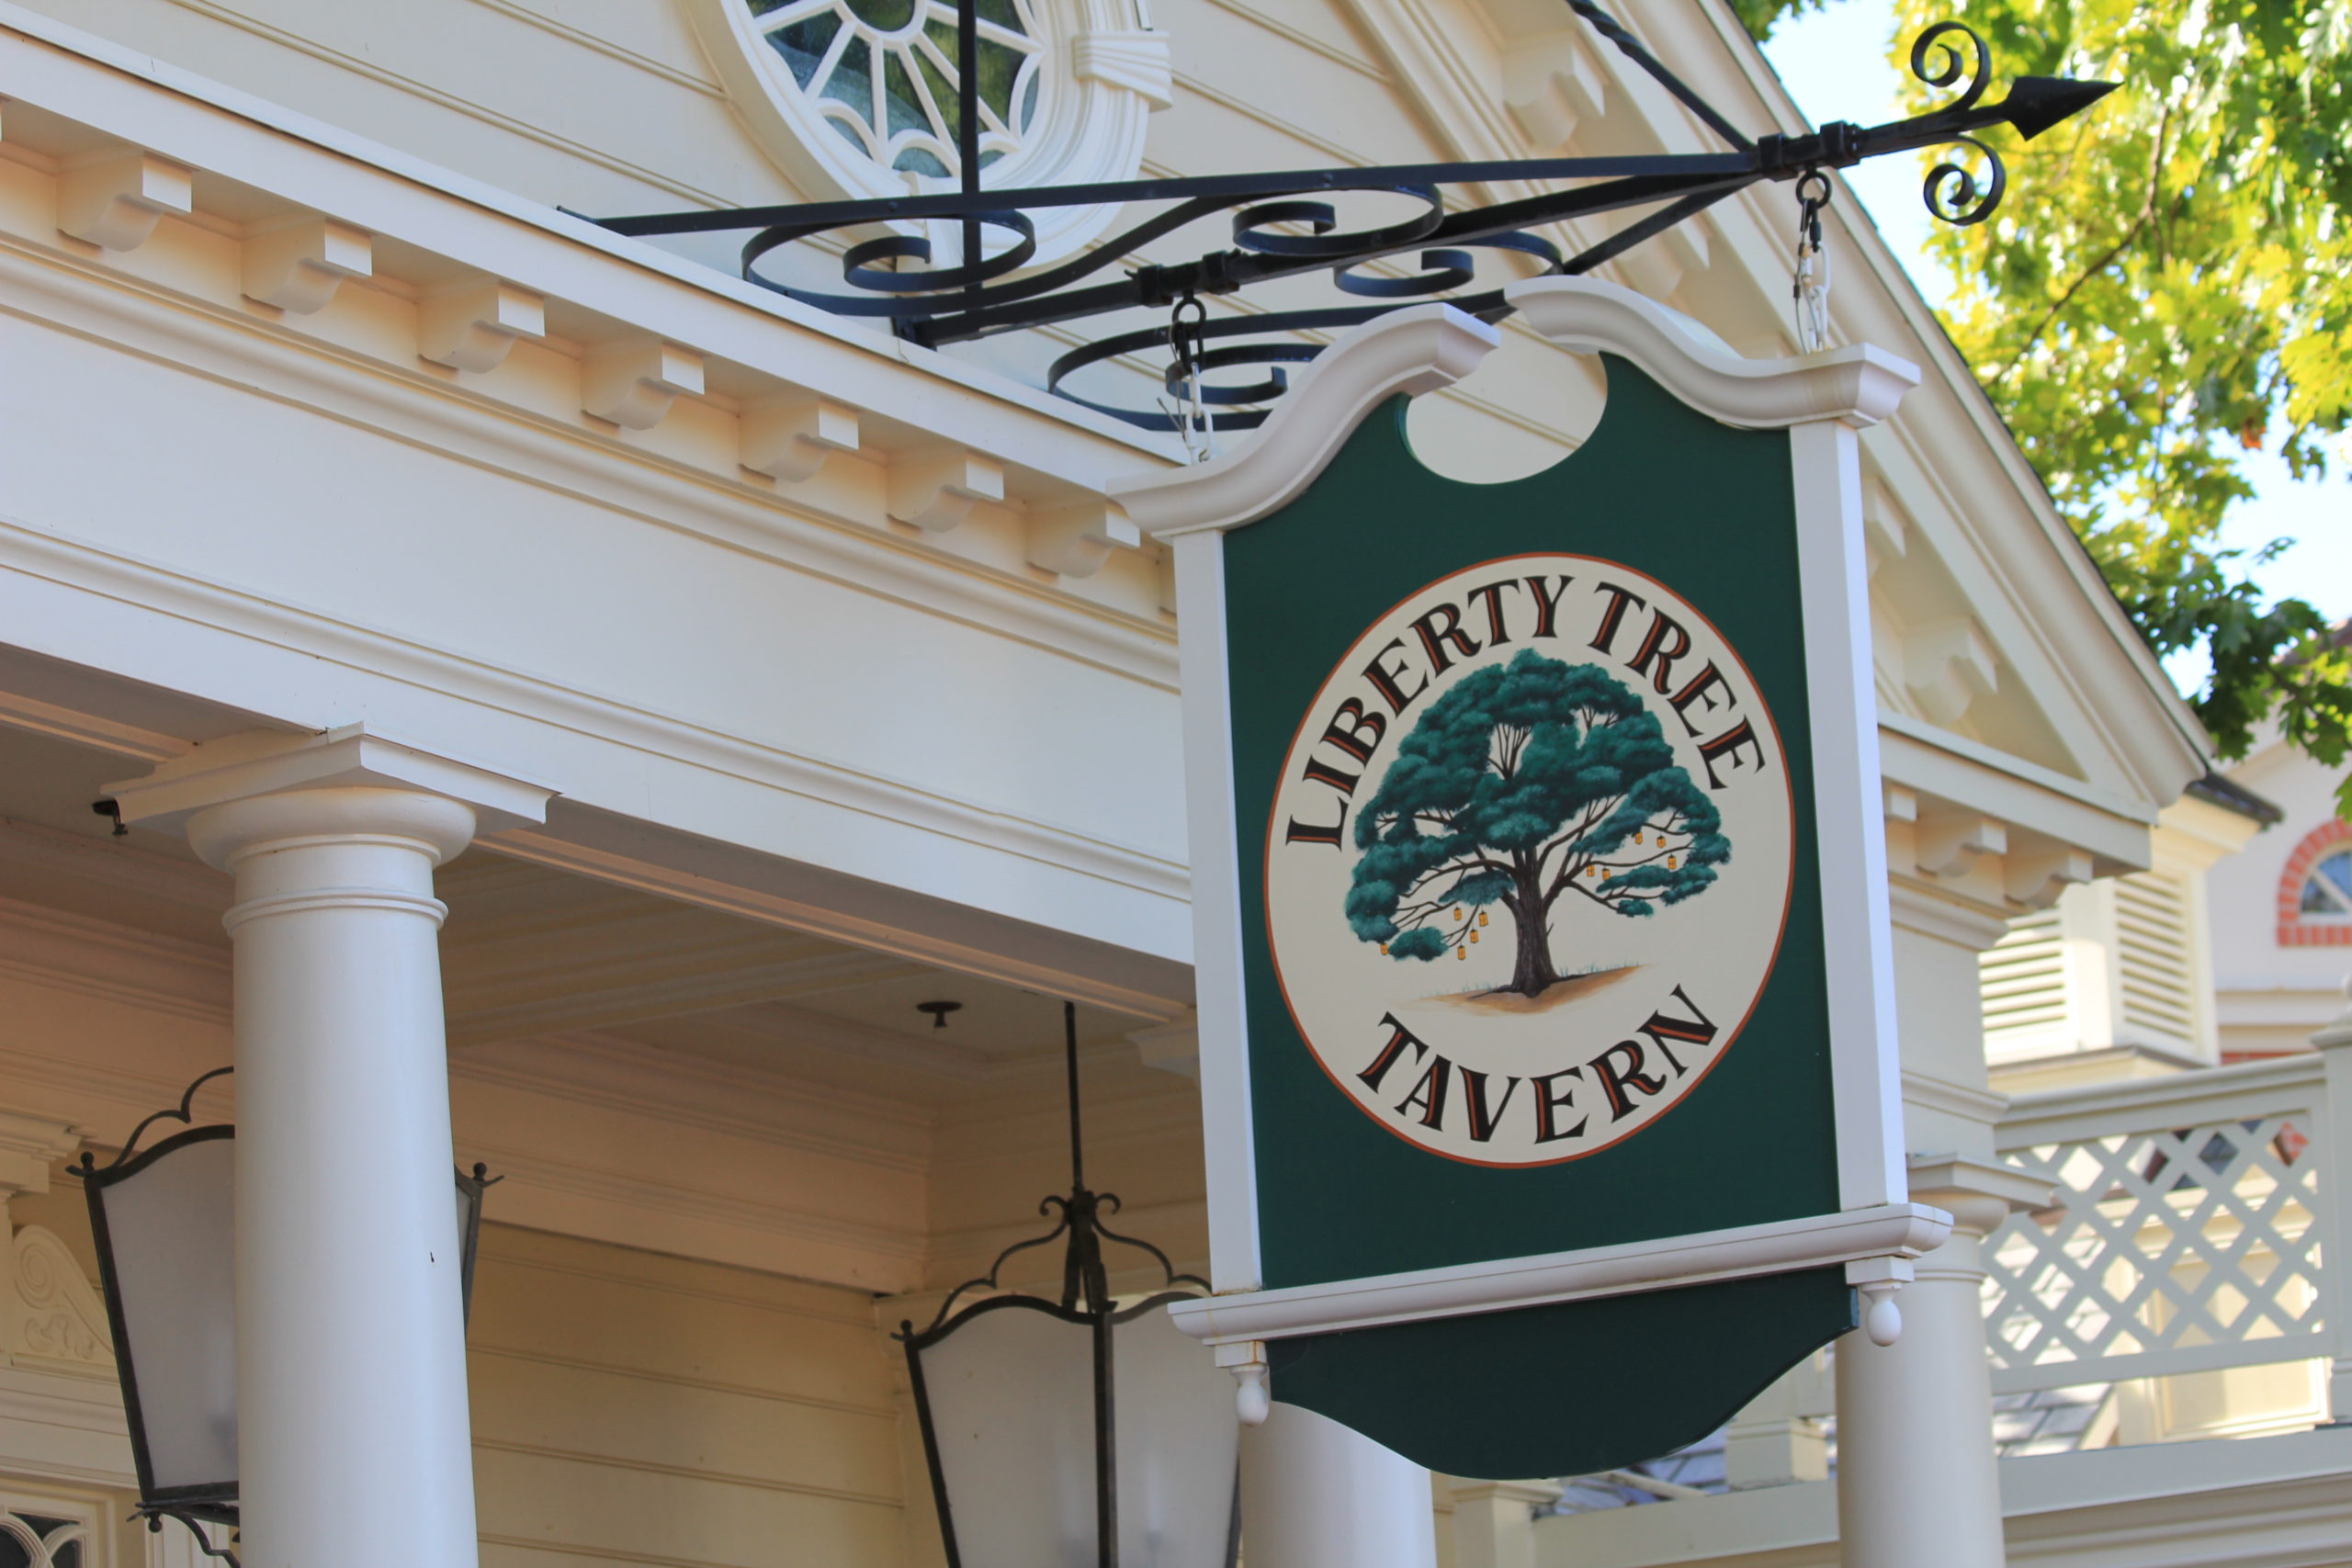 Restaurant Review: Liberty Tree Tavern - Me and the Mouse Travel